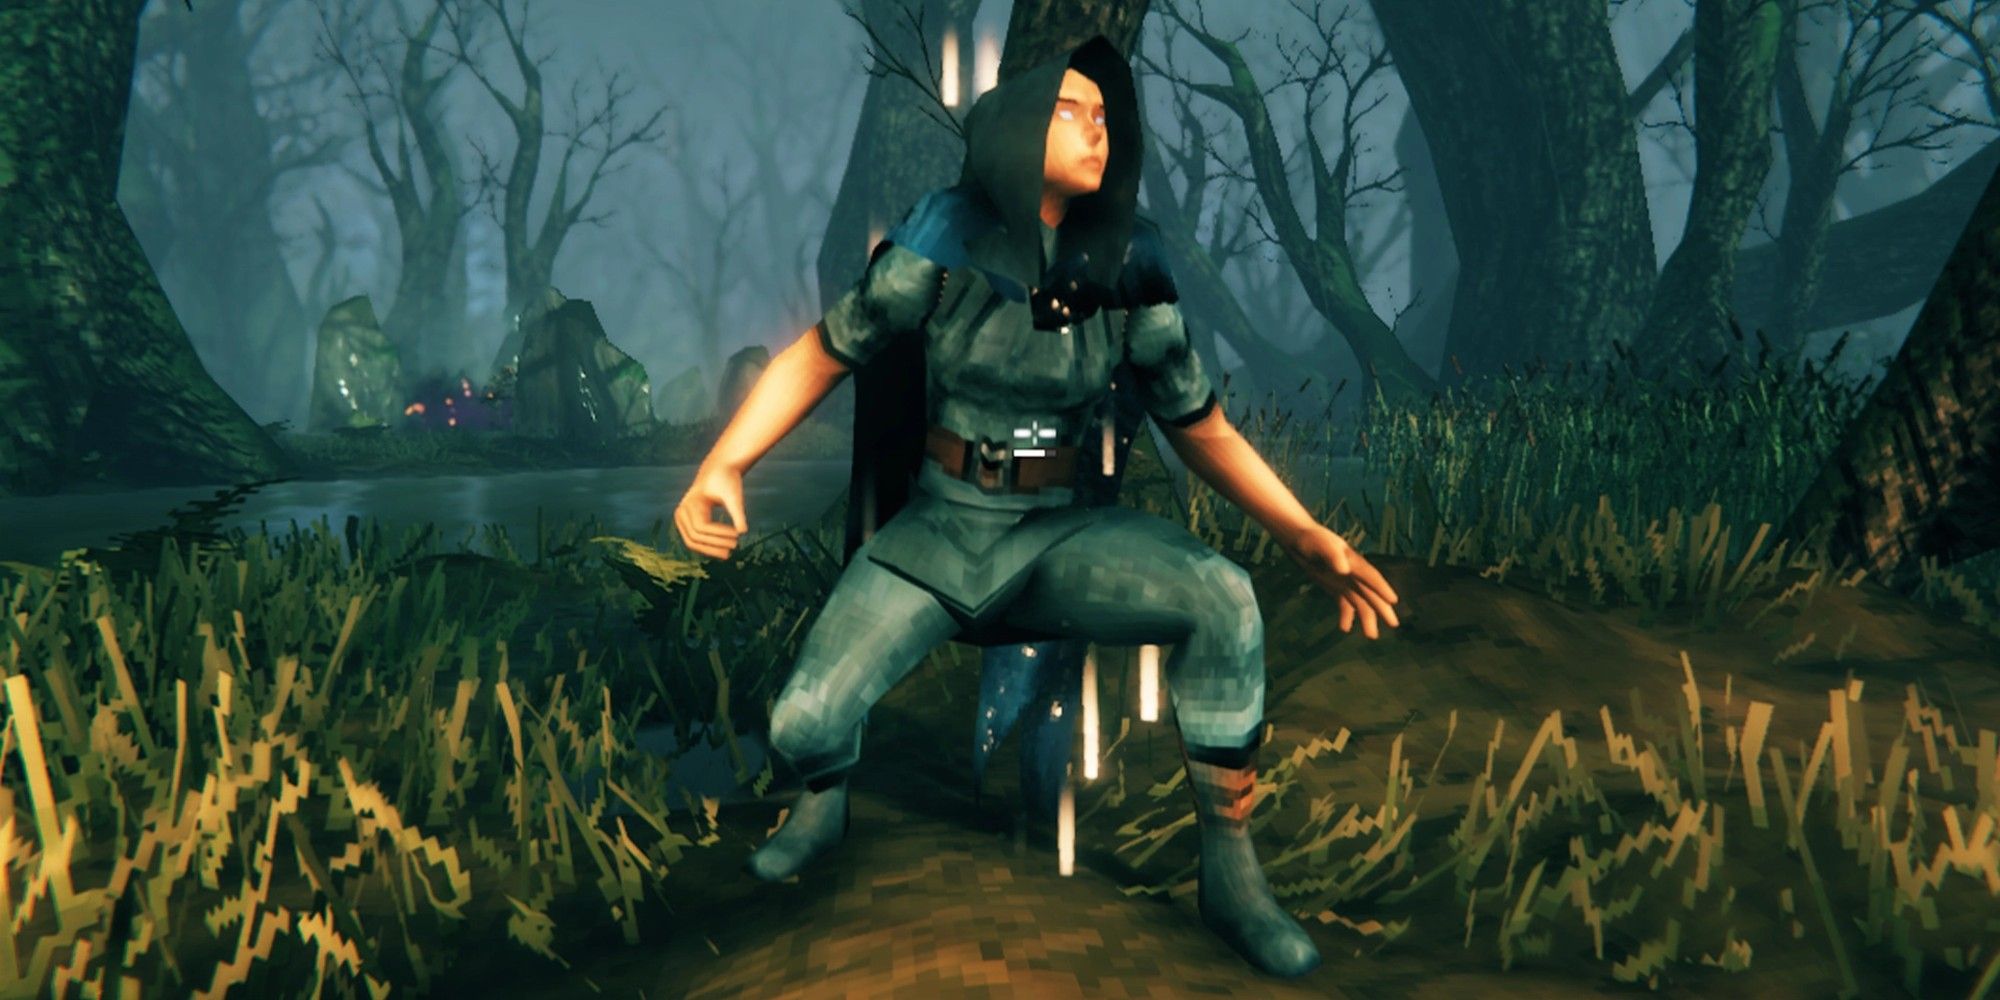 A player dons the Troll Hide Armor Set in Valheim